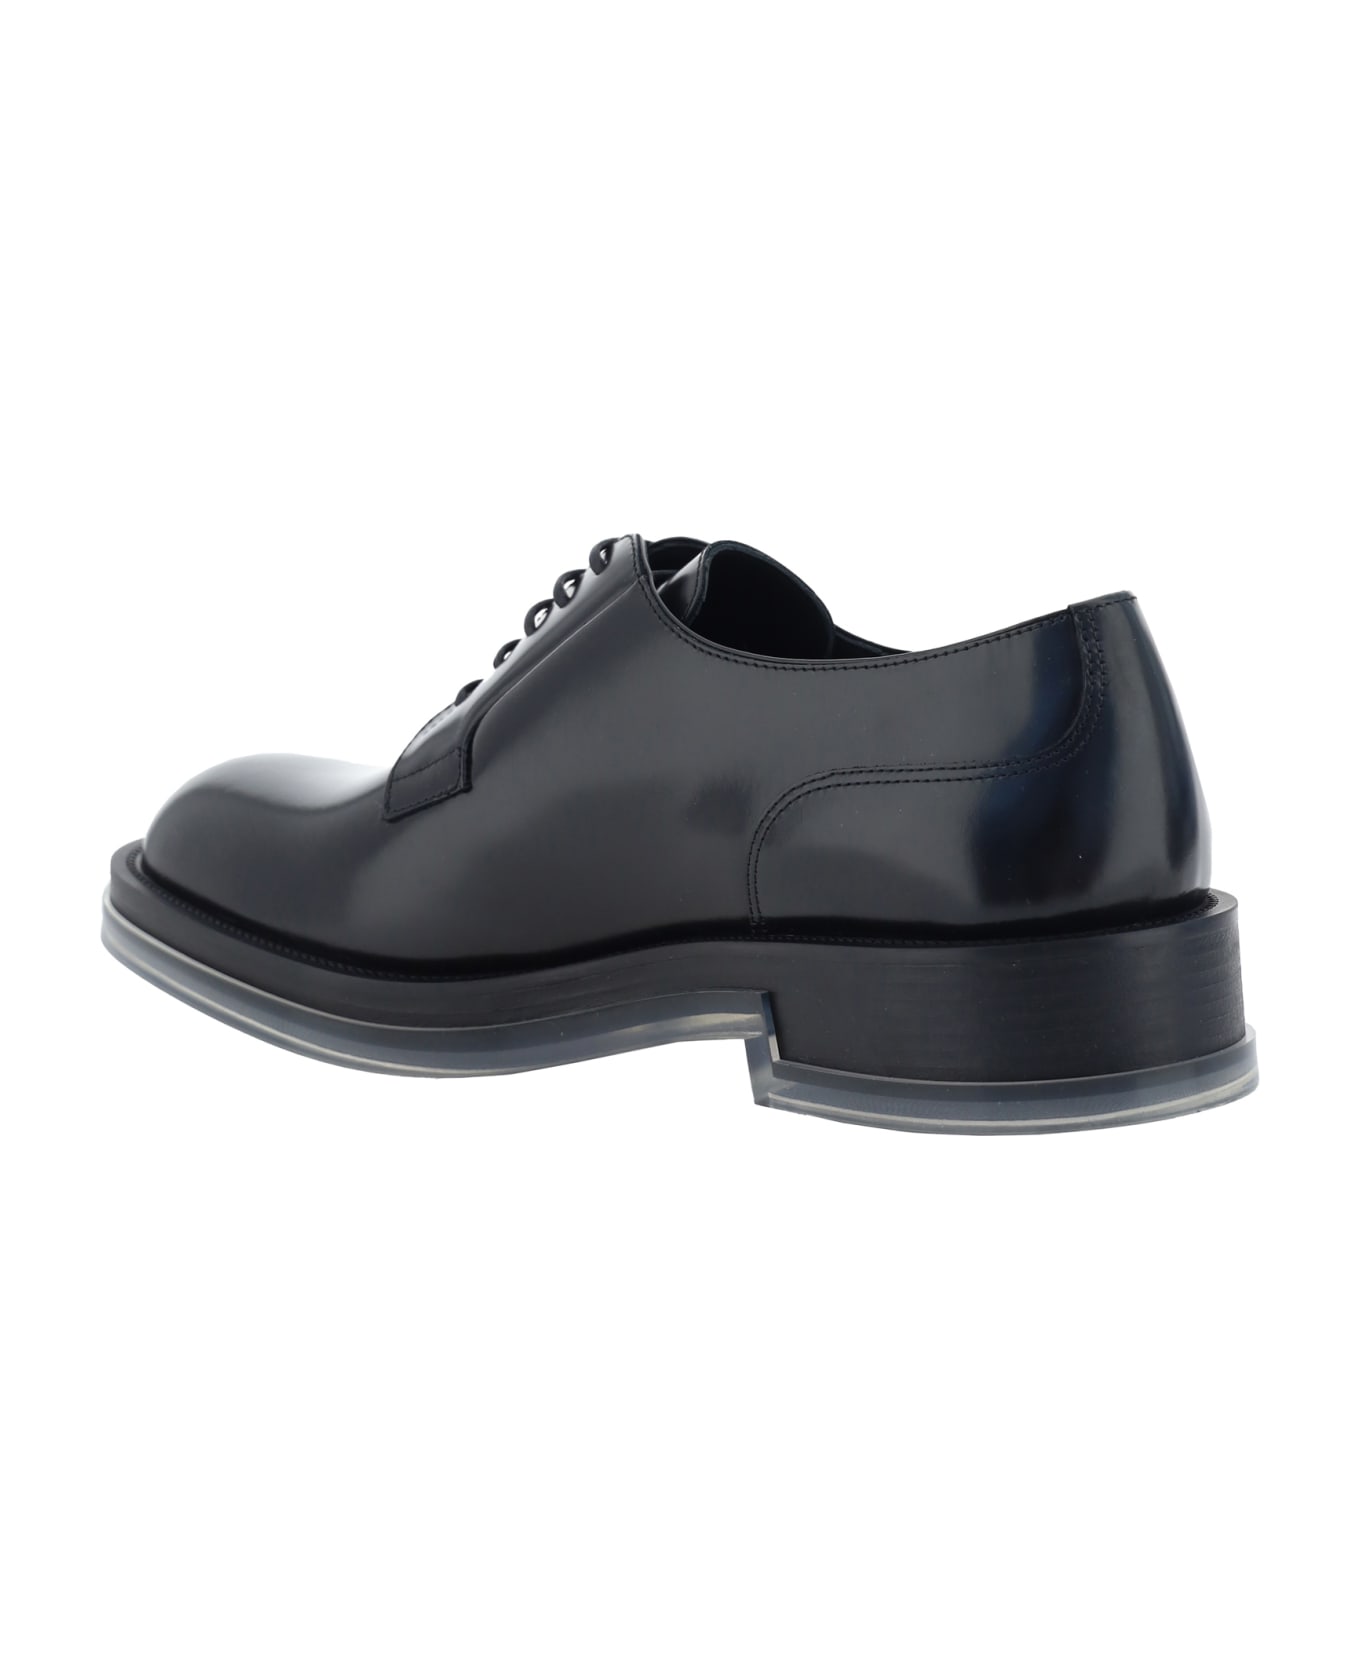 Alexander McQueen Lace-up Shoes - Black/transparent ローファー＆デッキシューズ